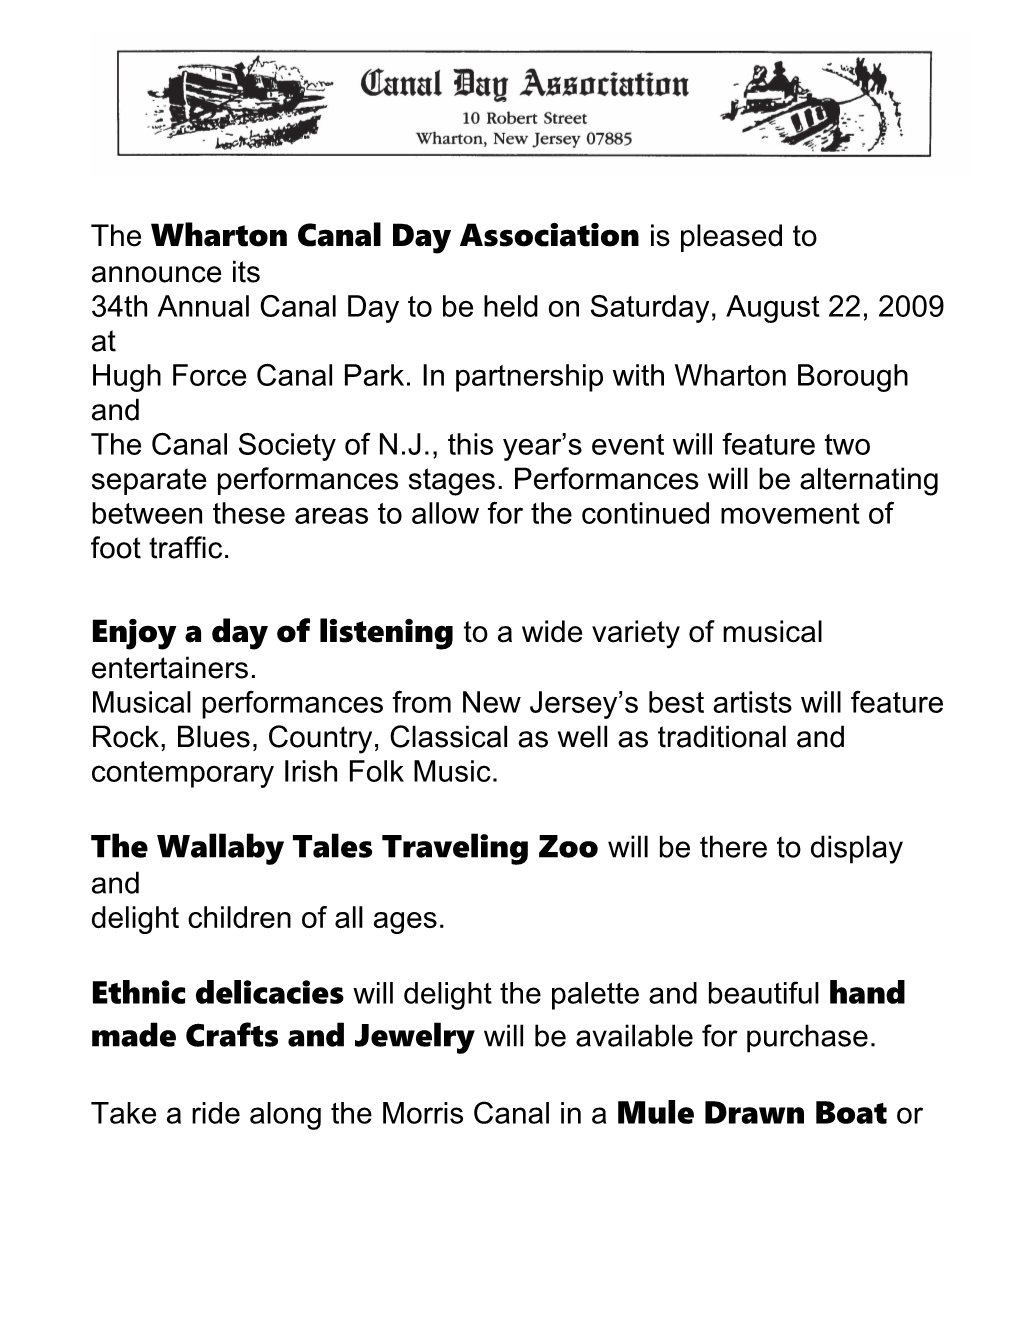 The Wharton Canal Day Association Is Pleased to Announce Its